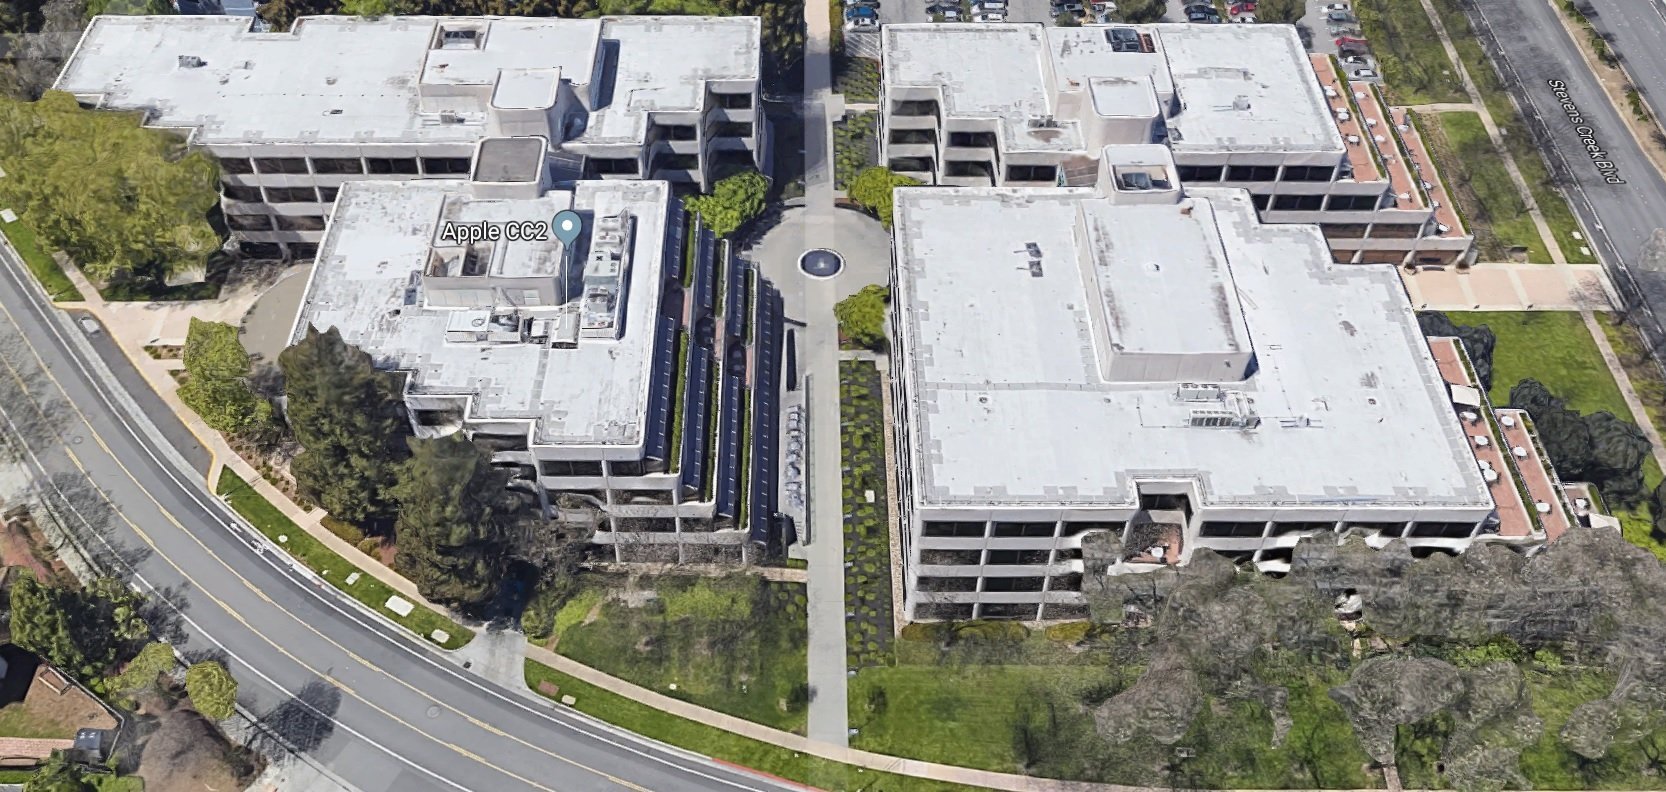 Apple invests $ 290 million in two more Cupertino office buildings